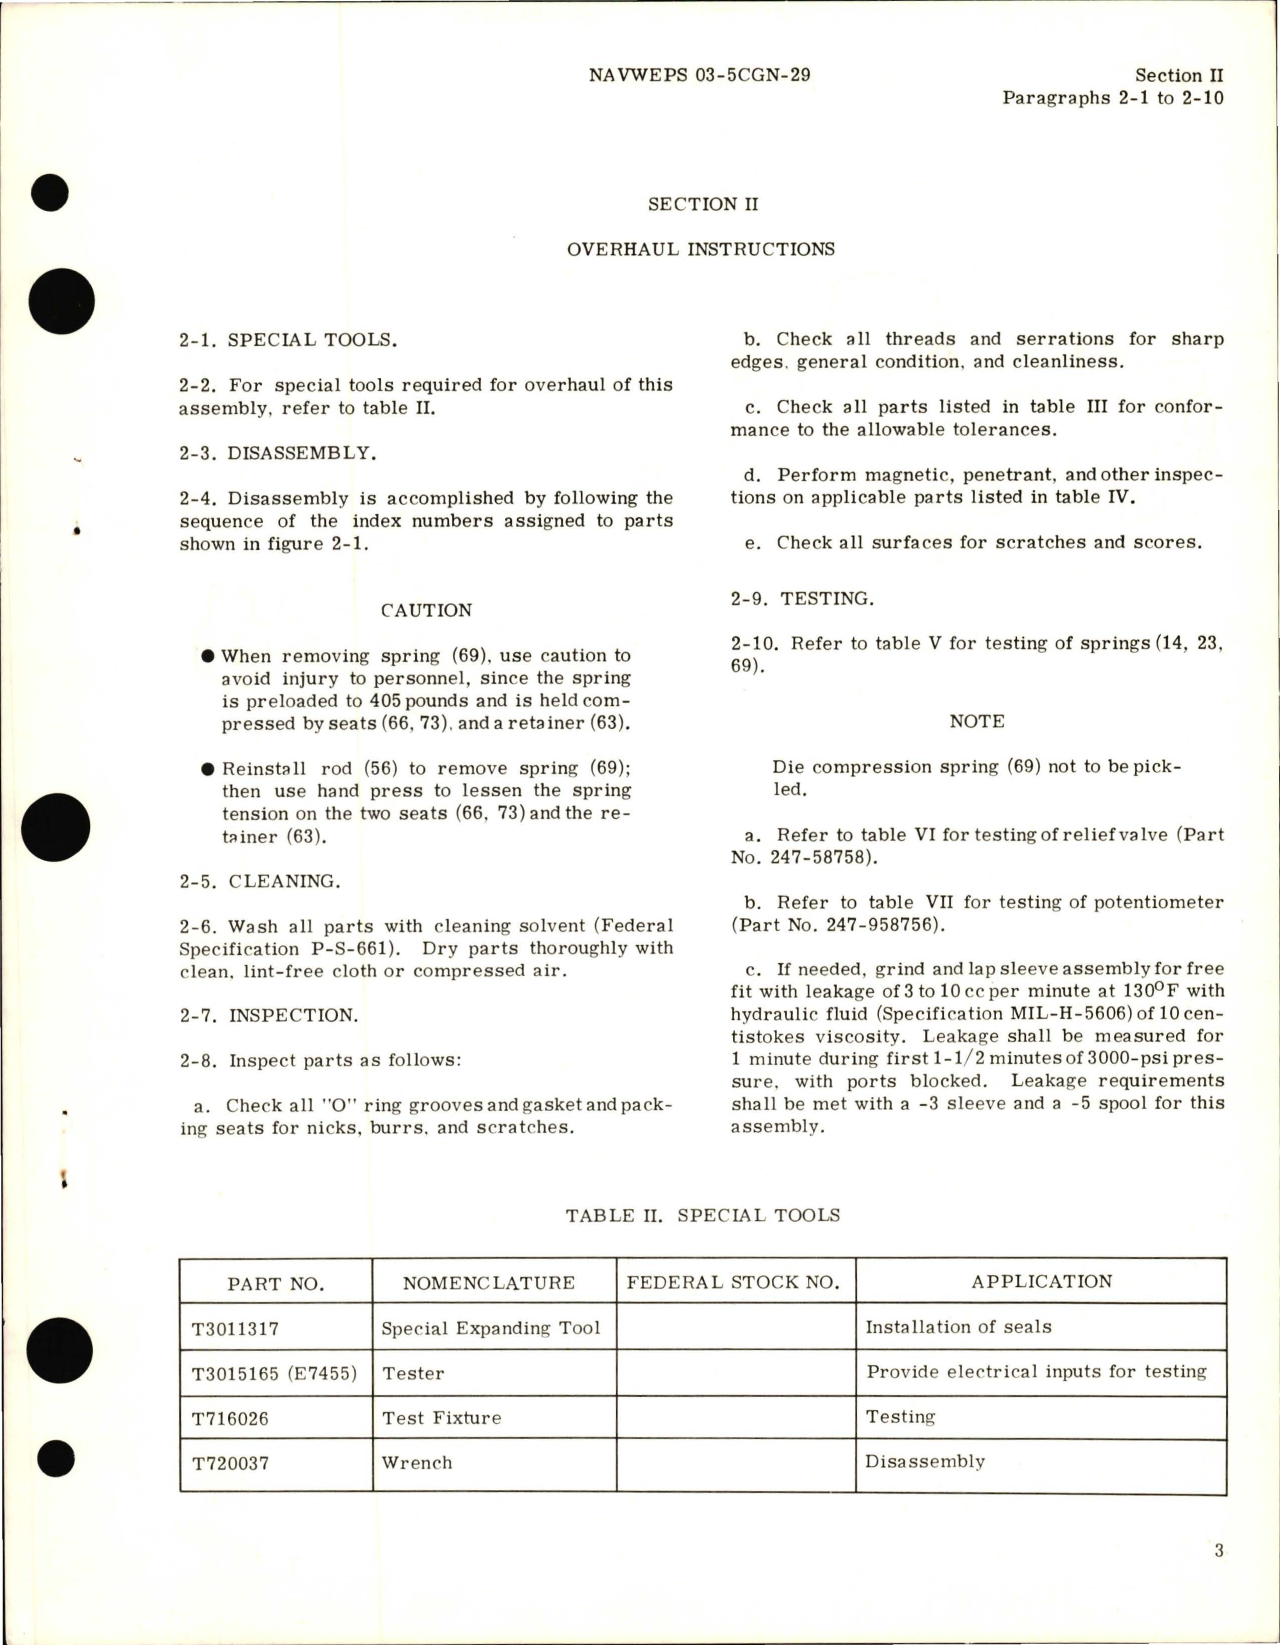 Sample page 5 from AirCorps Library document: Overhaul Instructions for Hydraulic Flight Control, Vertical Stabilizer Actuator Assembly - Part 247-58715-31 and 247-58715-41